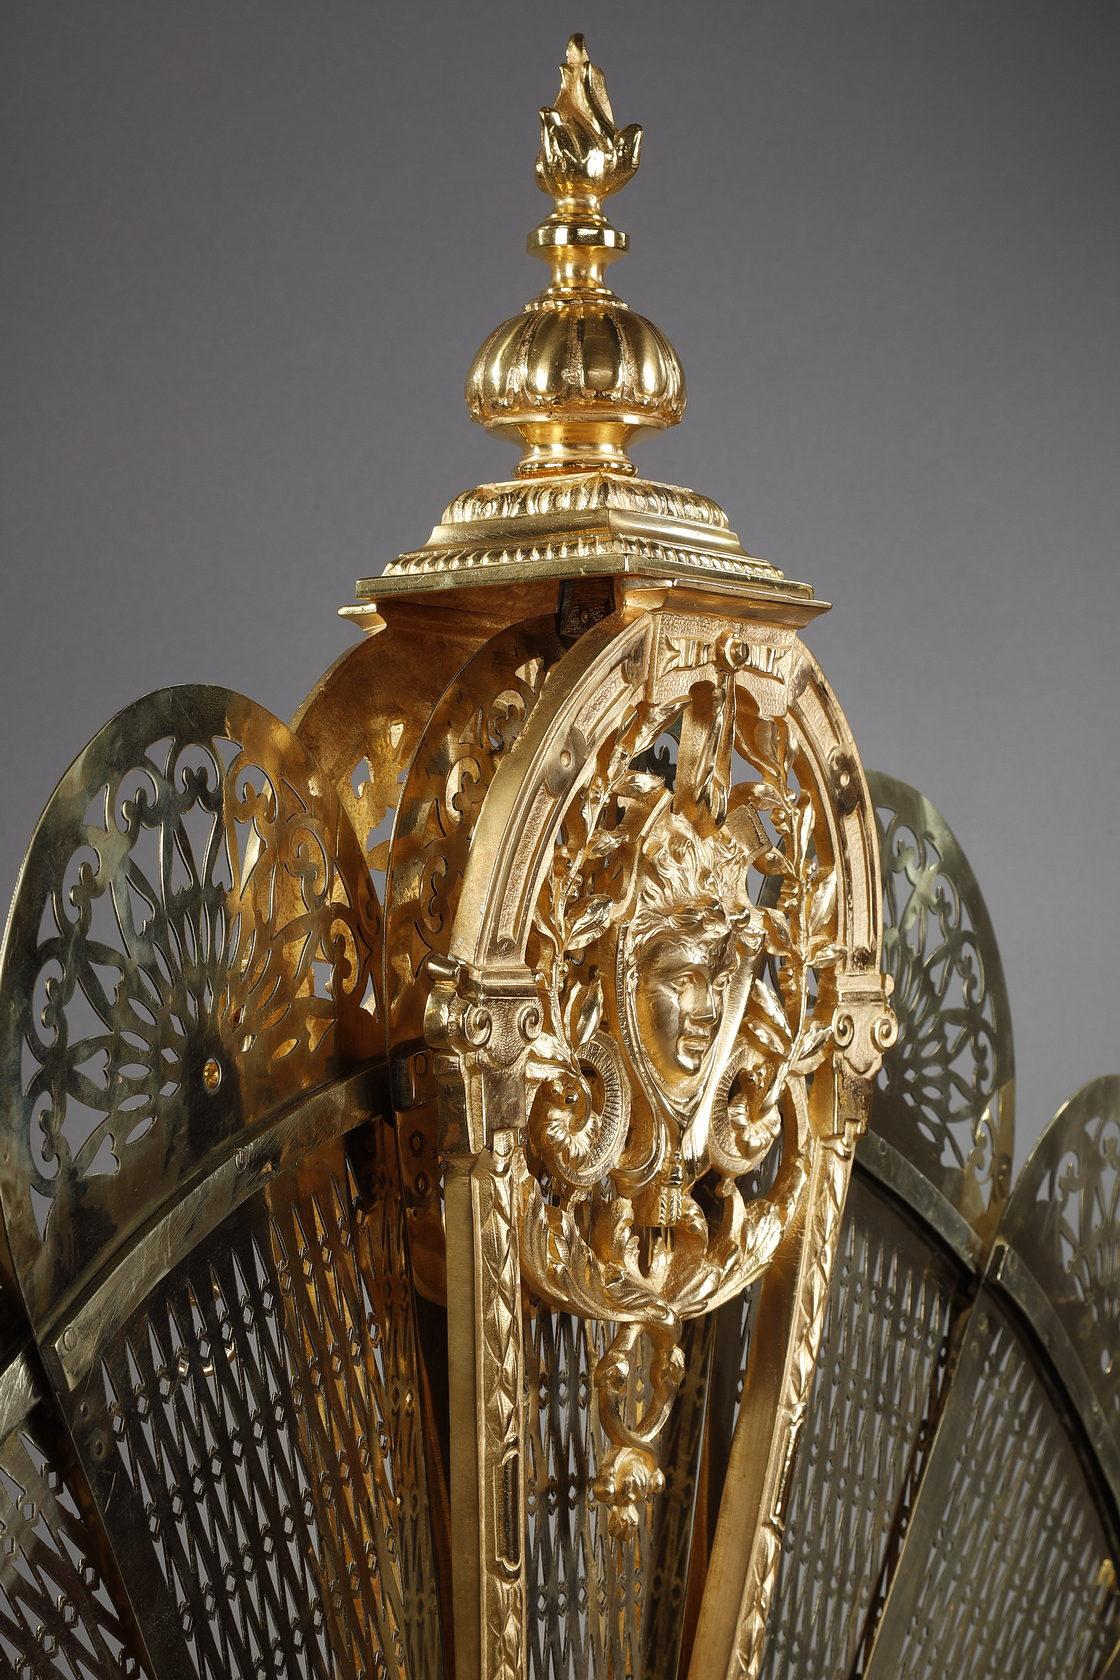 French Gilt bronze and chased fan-shaped fire screen with female face decoration